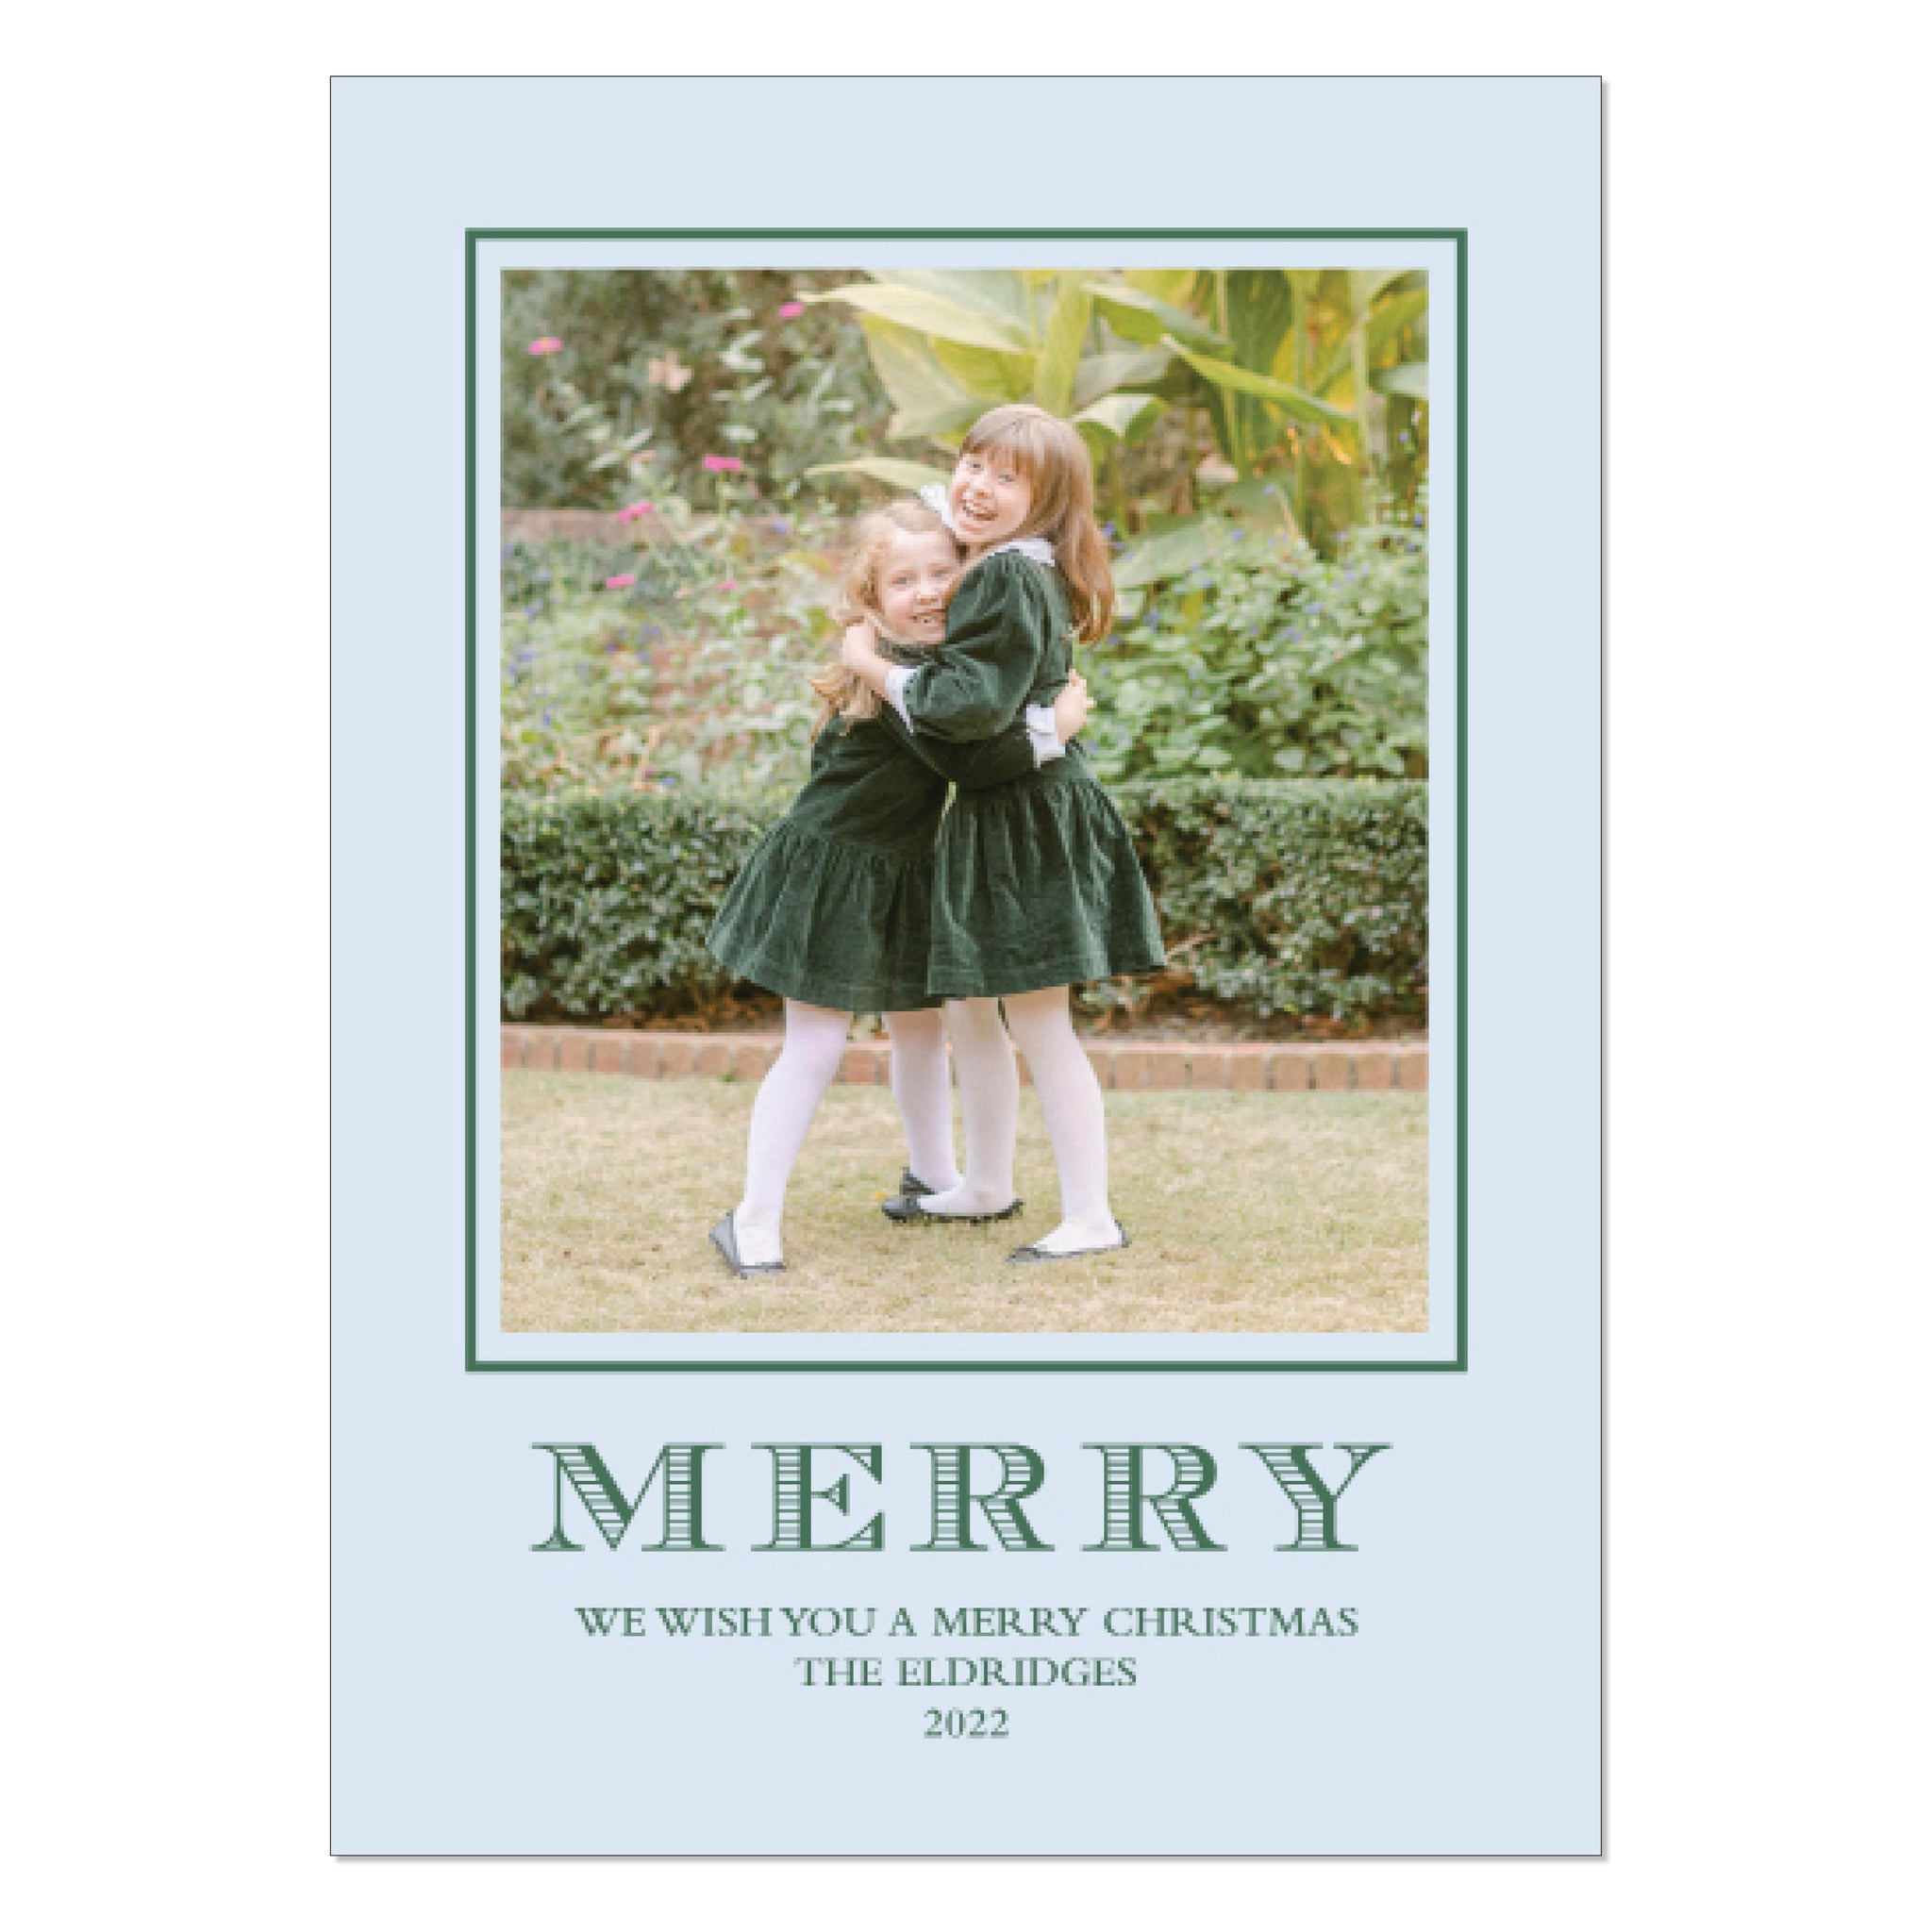 MERRY-Blue and Green Holiday Card